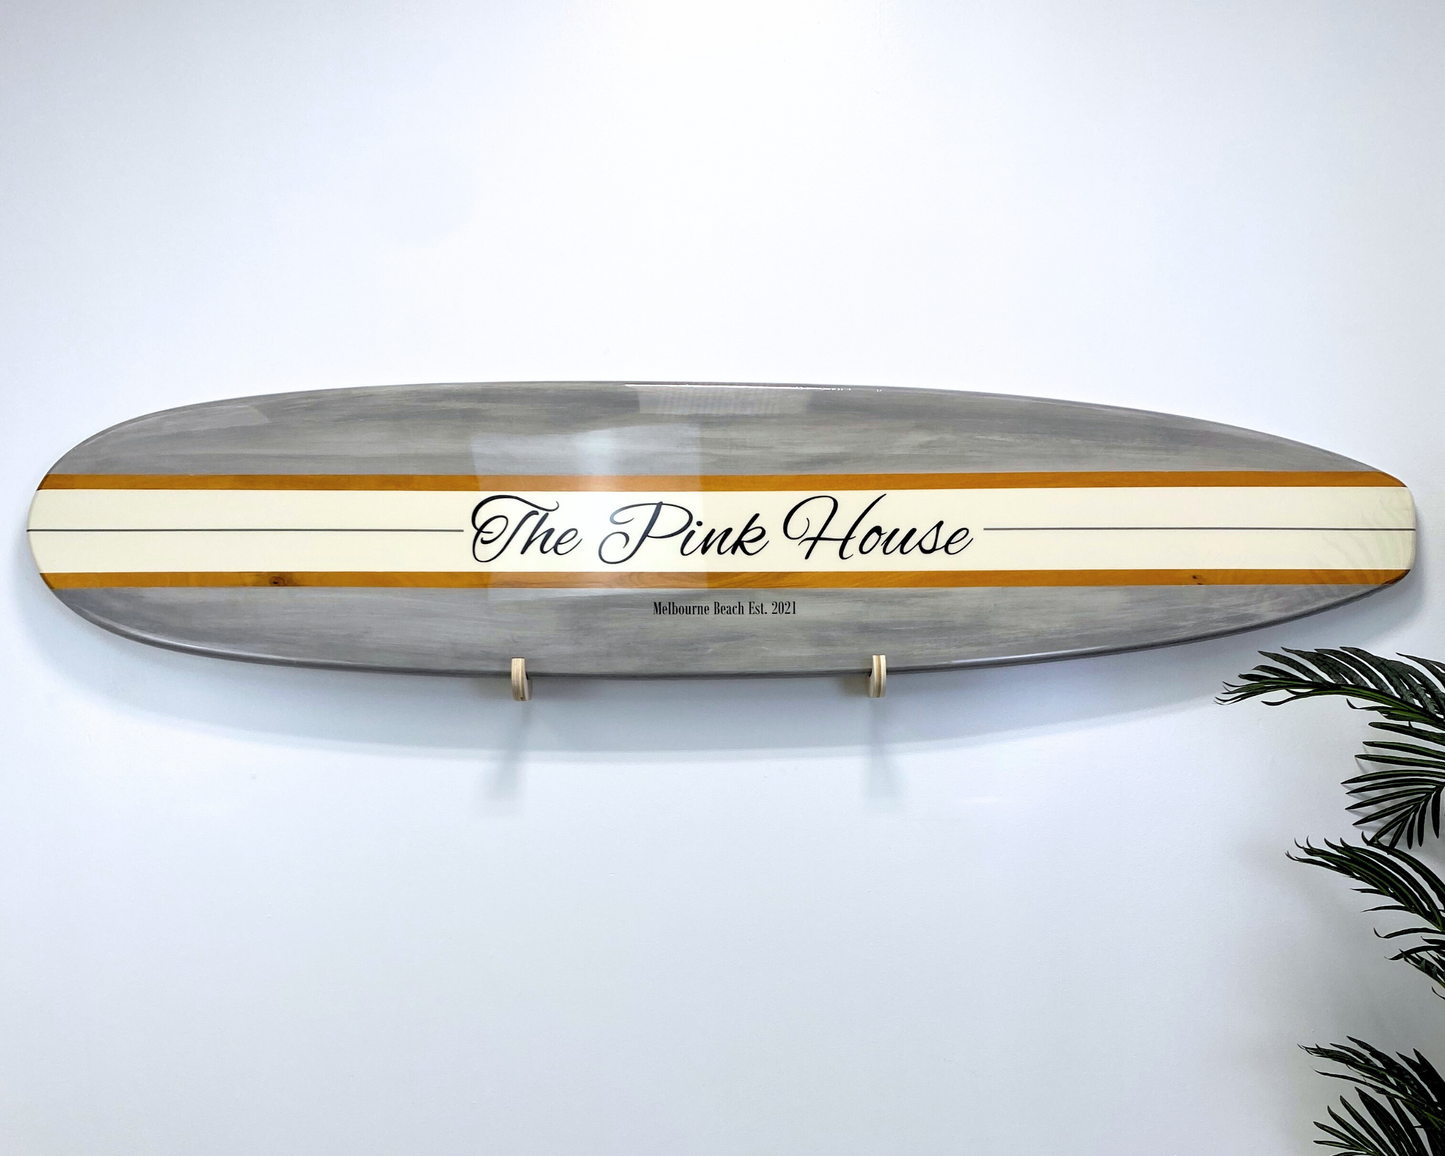 The Weathered Classic Surfboard Wall Art